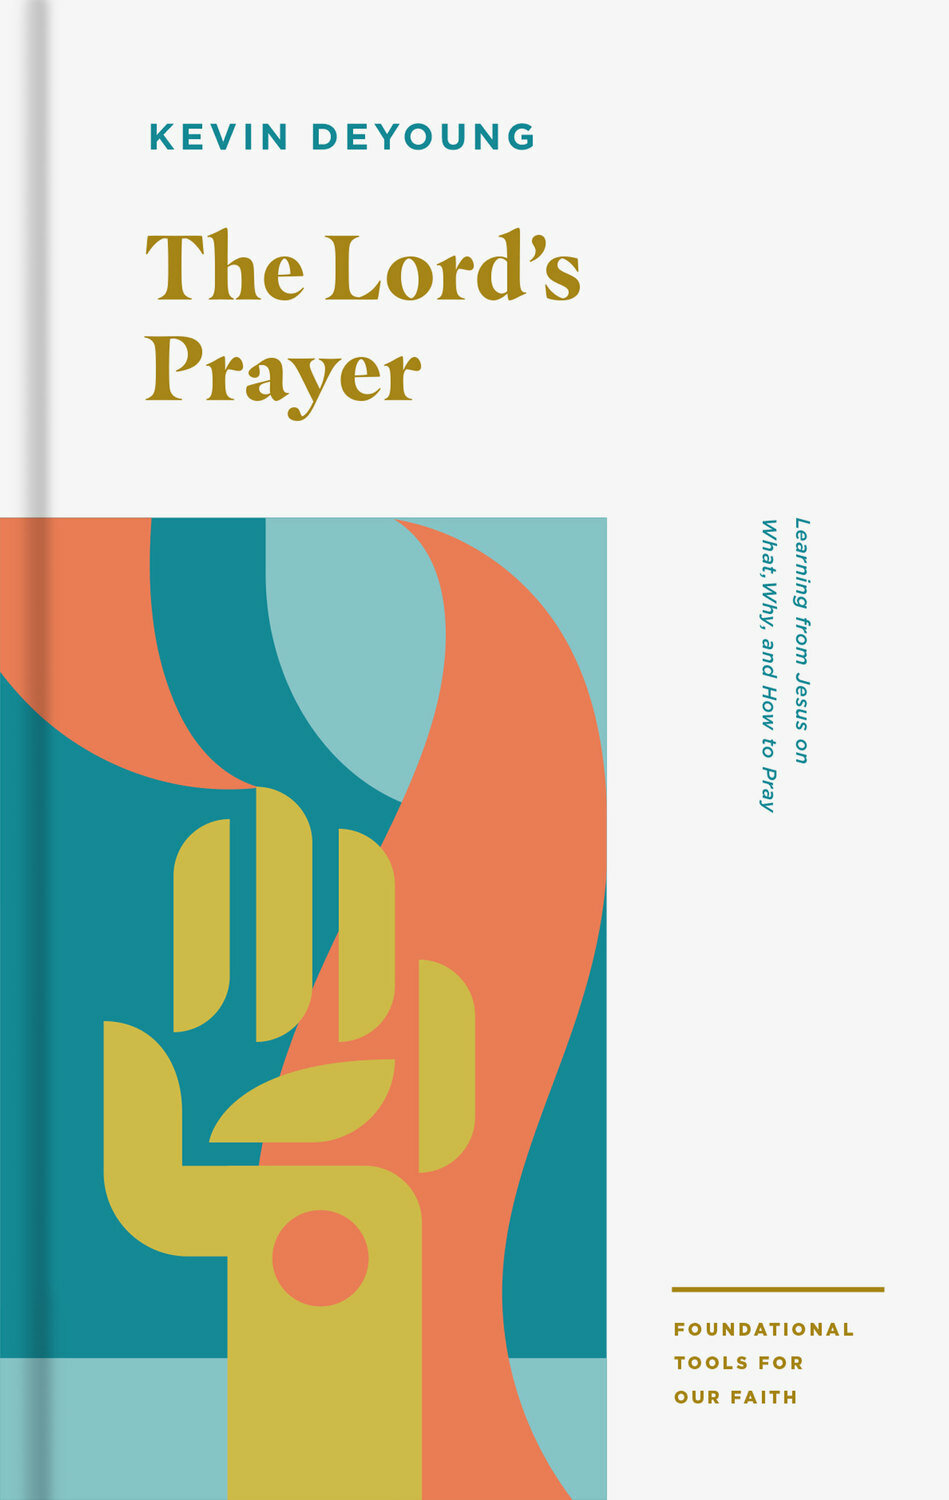 The Lord’s Prayer: Learning from Jesus on What, Why, and How to Pray (Foundational Tools for Our Faith)